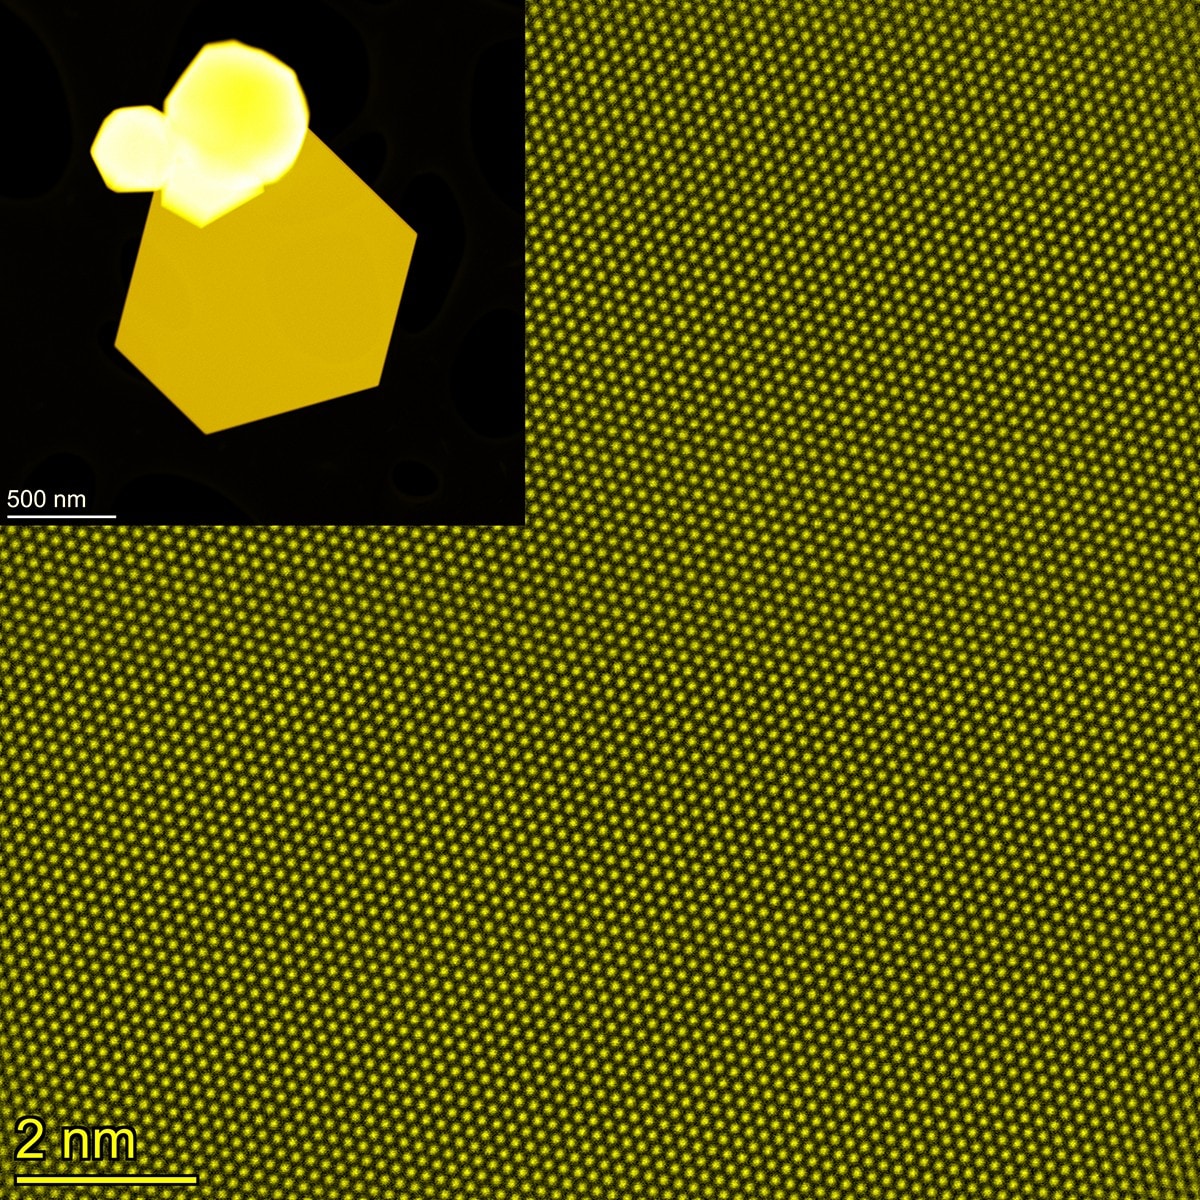 An image of tiny small yellow octagons and a black background with the caption 2nm indicating the size